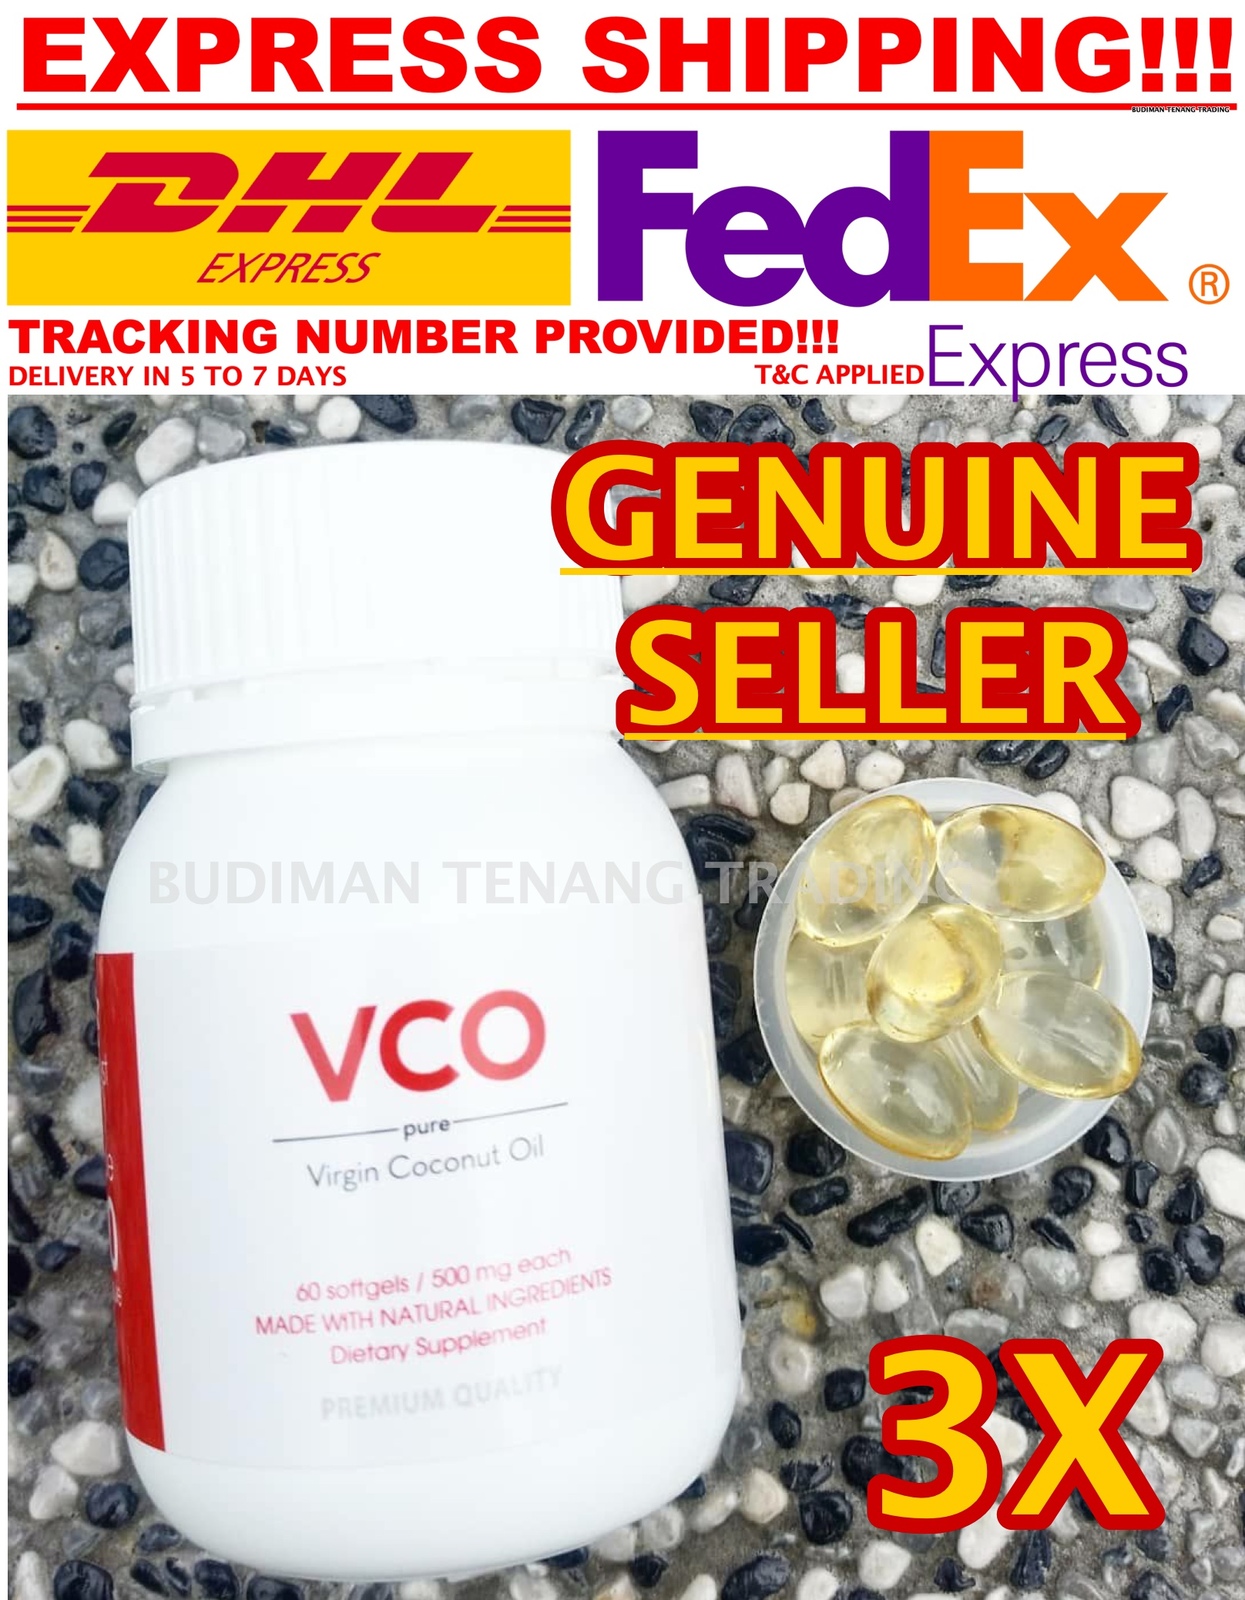 Primary image for 3 bottle VCO Virgin Coconut Oil Pure 60 softgels/500mg FREE DHL Express Shipping